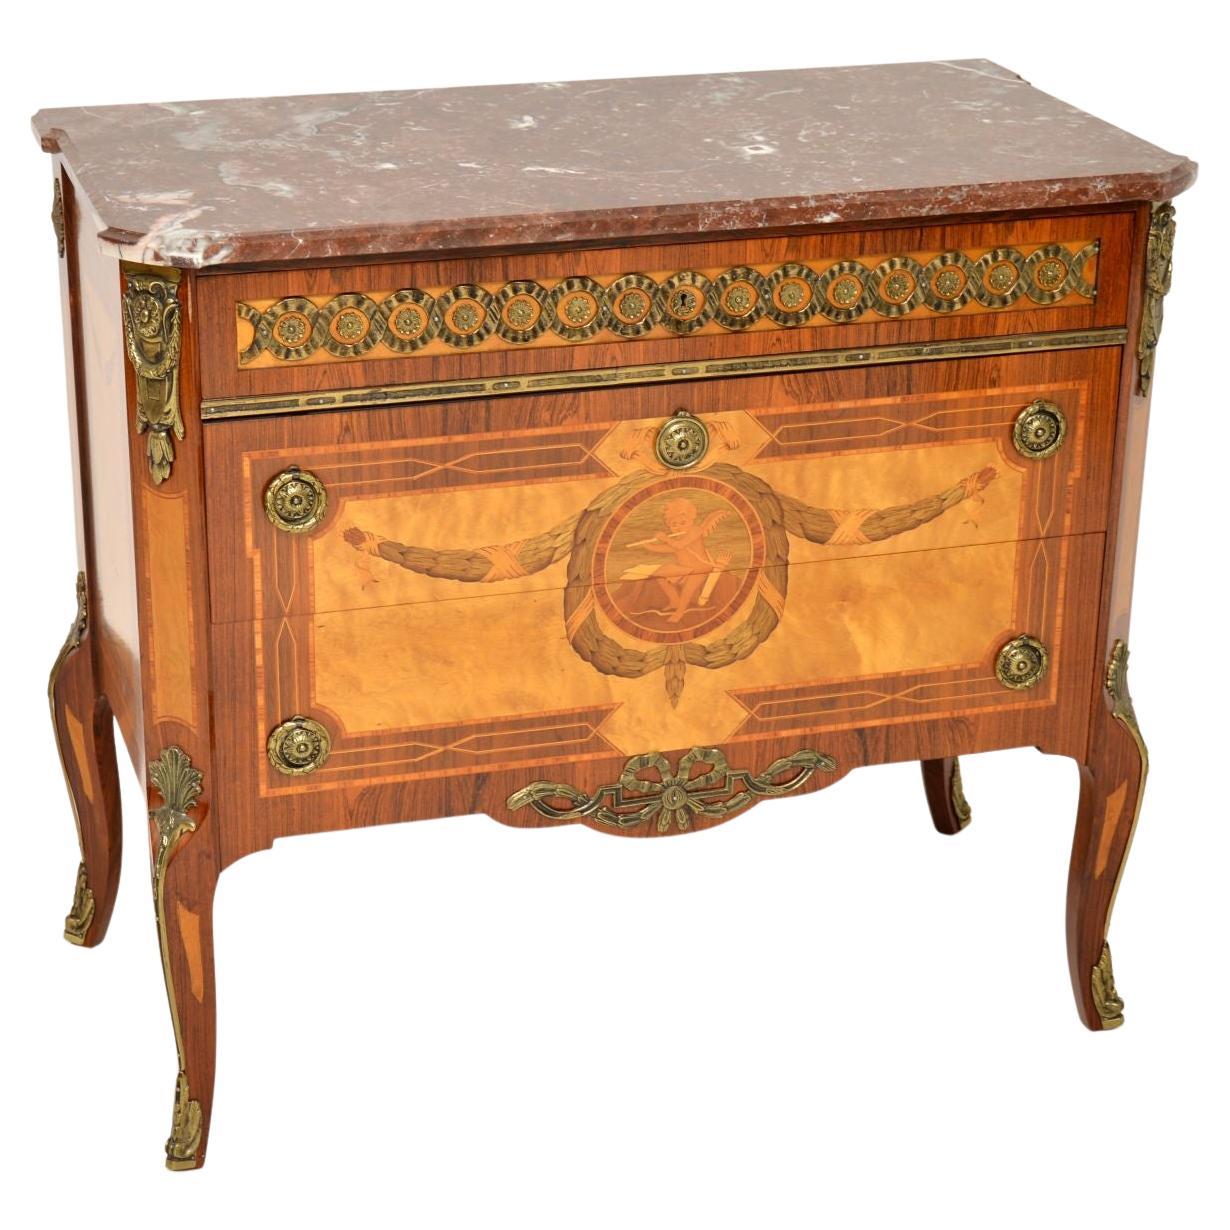 Antique Swedish Inlaid Marquetry Marble Top Commode